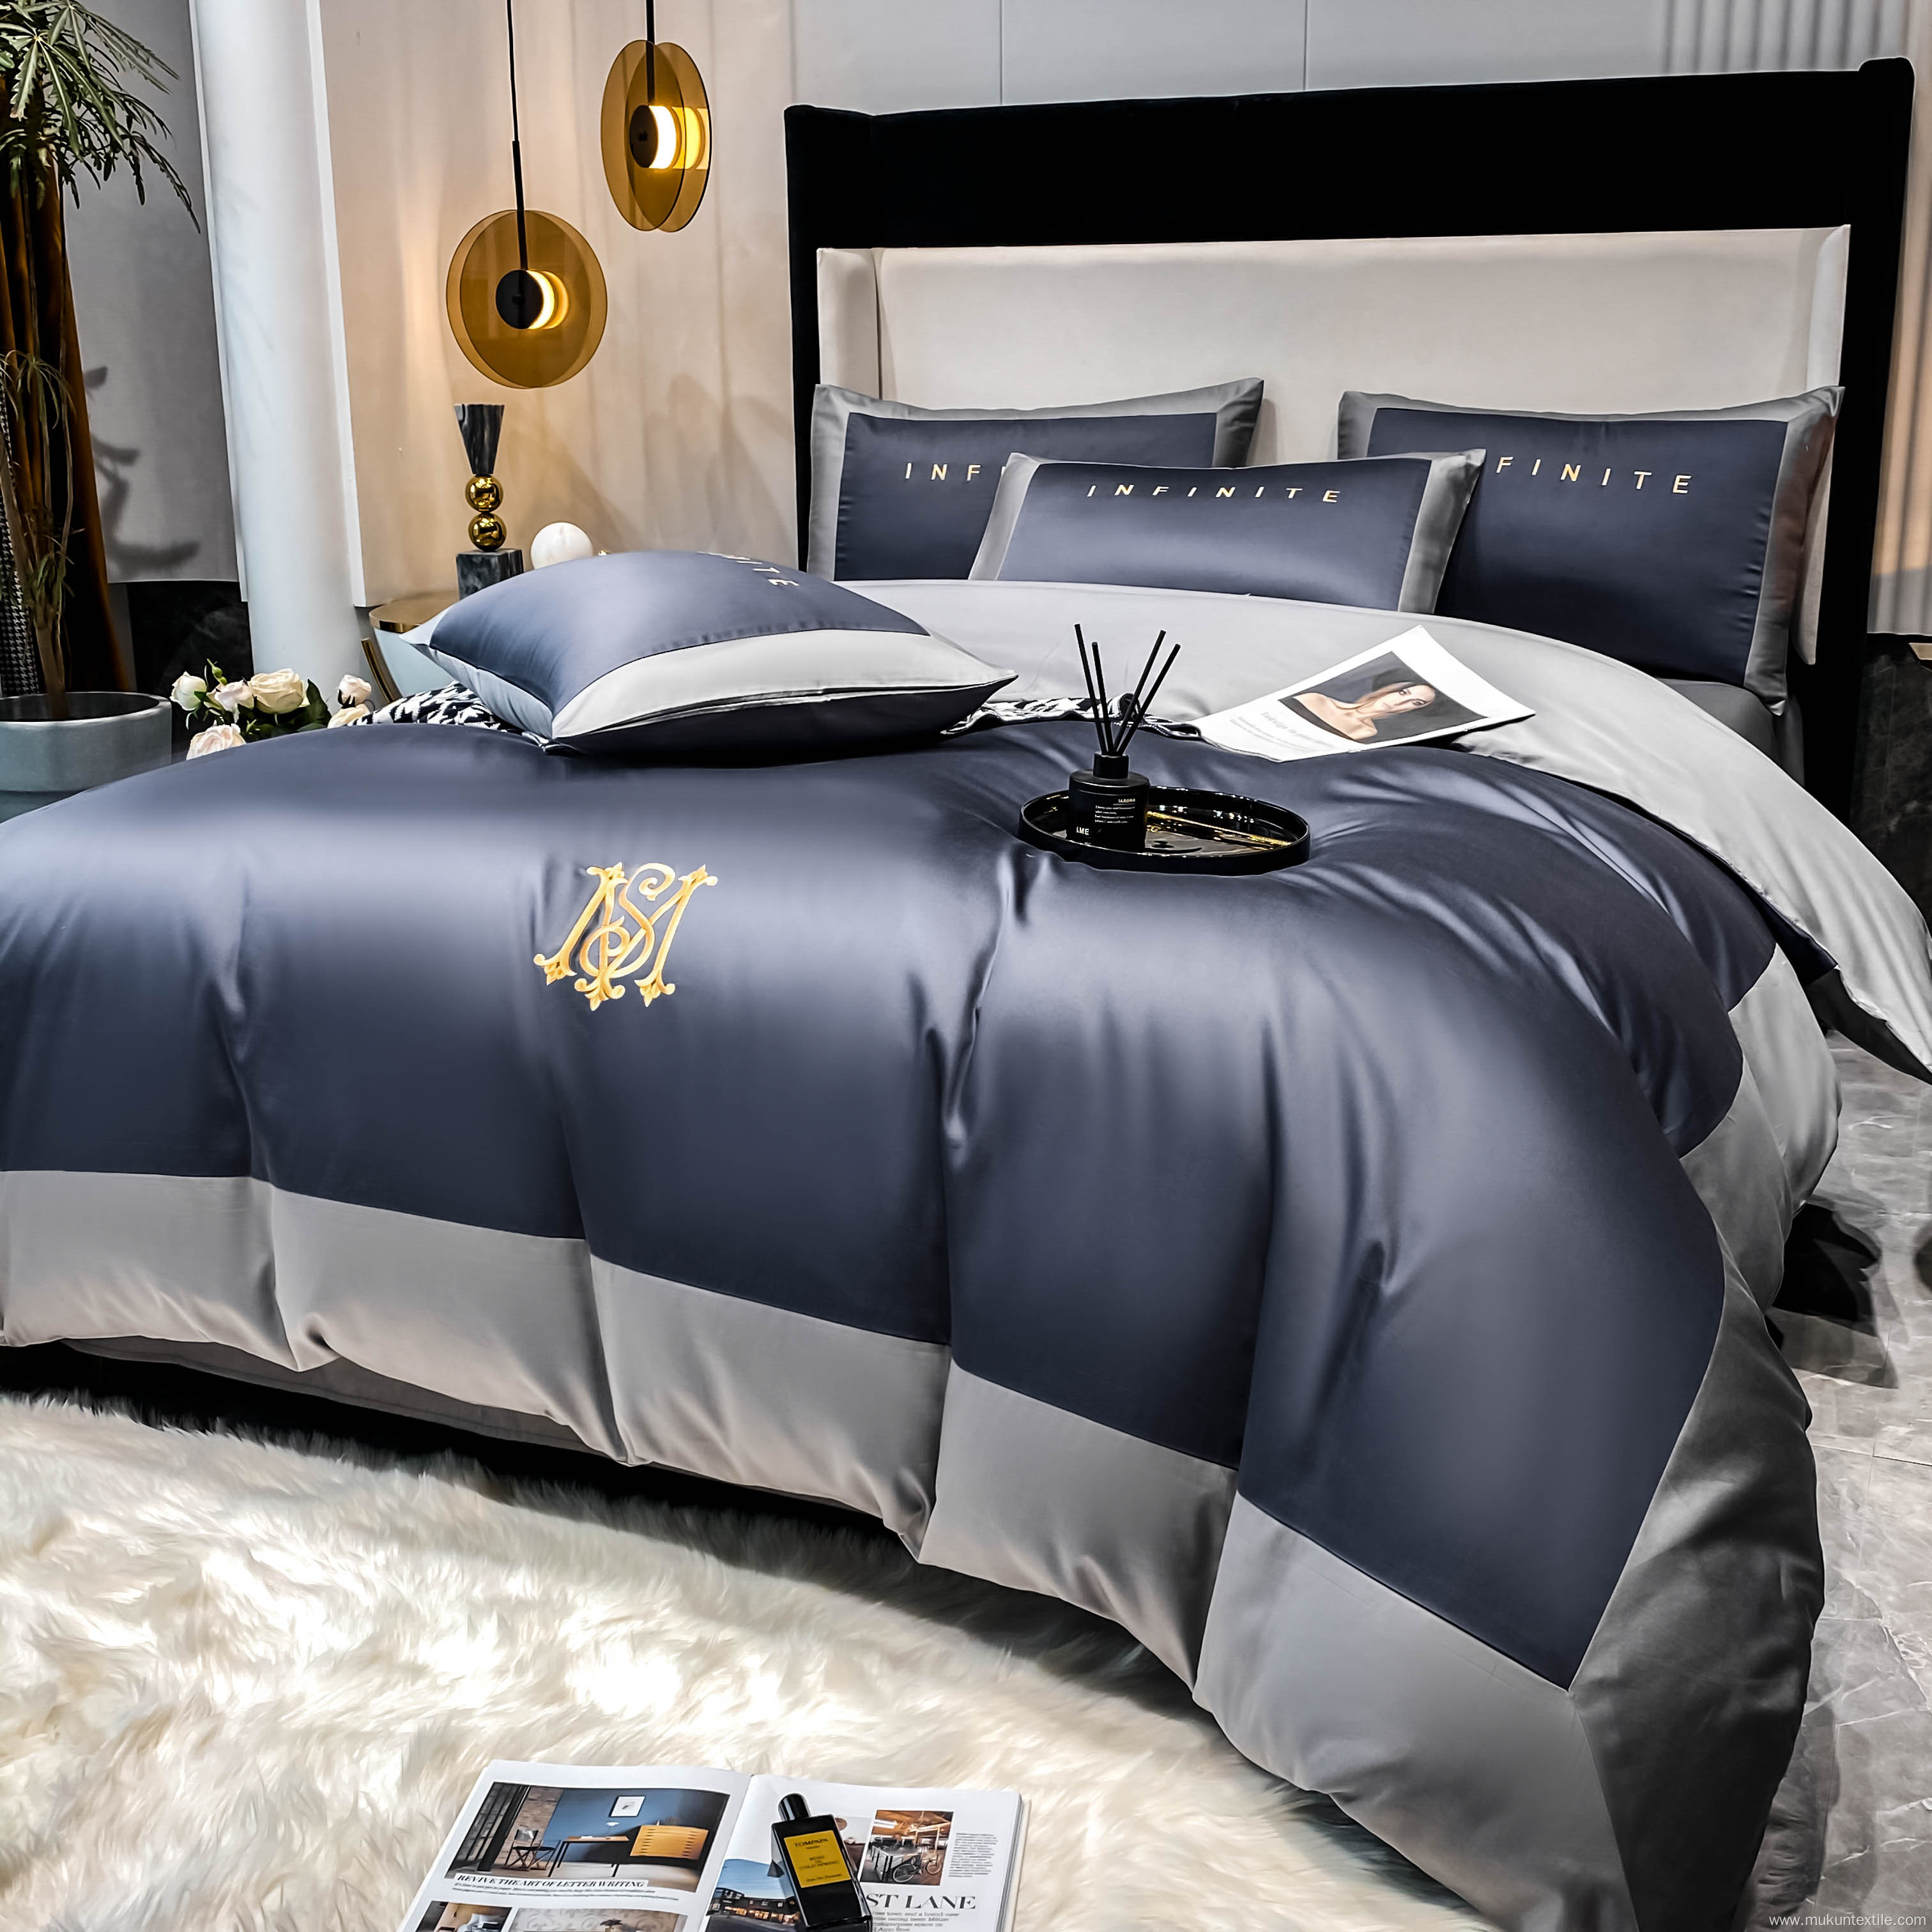 100% egyptian cotton embroidery bed sheets bedding set